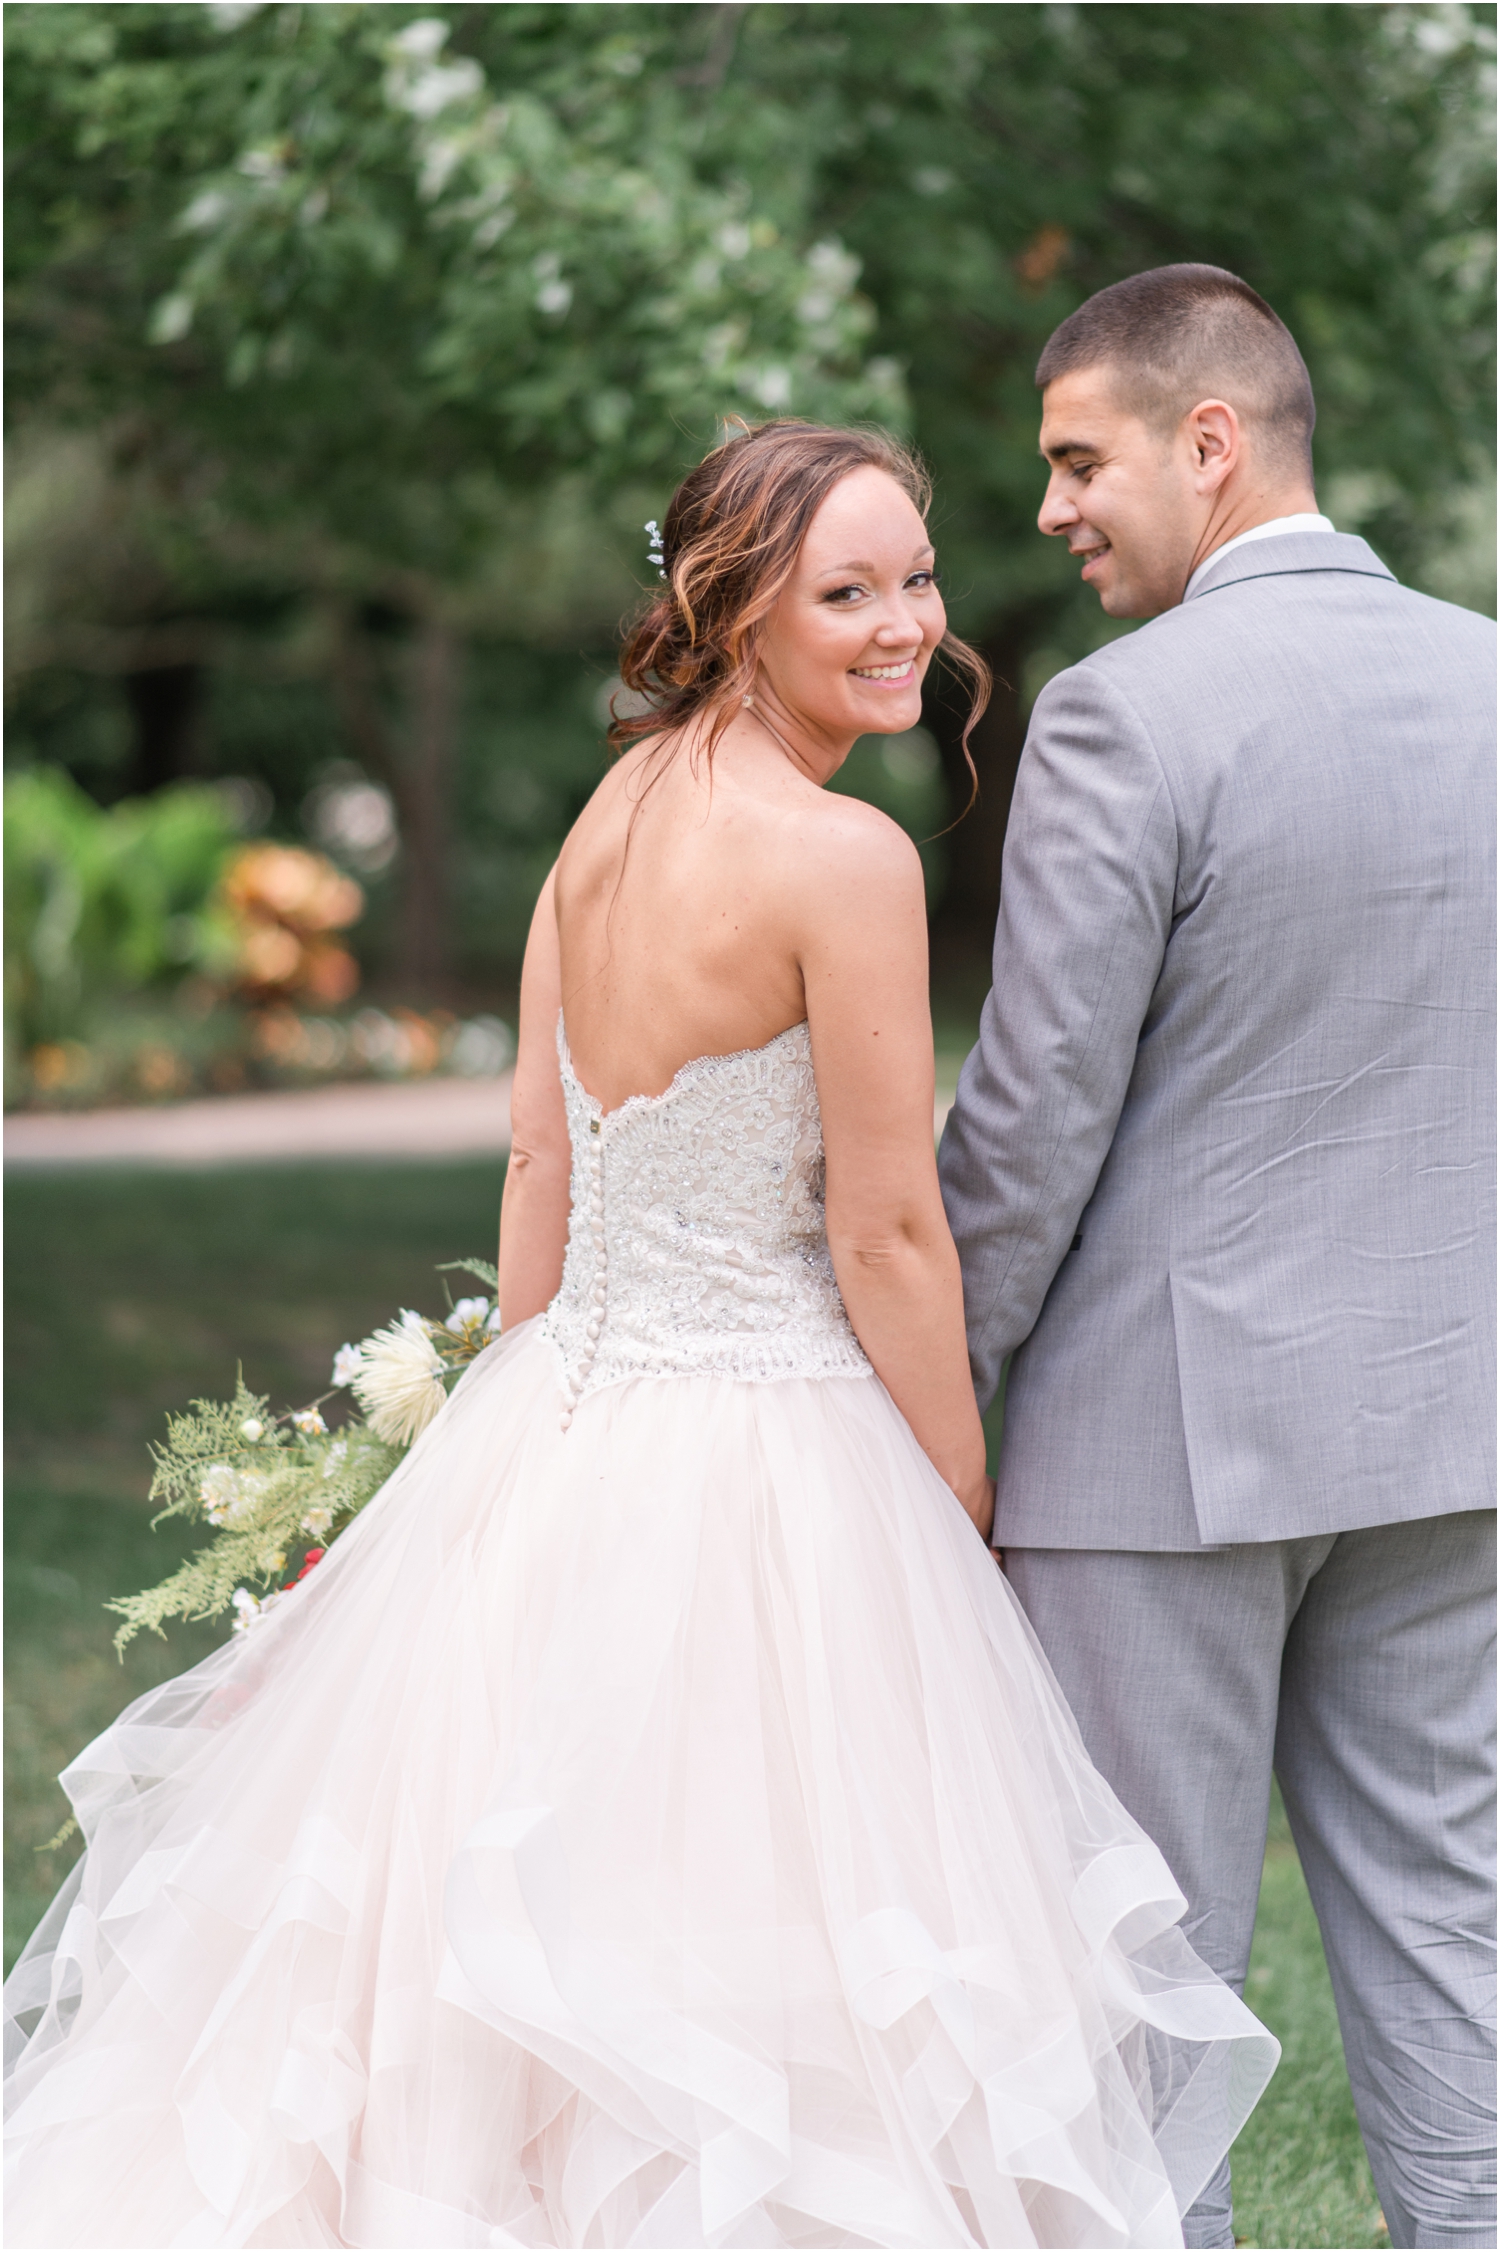 Bride and Groom Portraits Blush wedding gown Wedding Photography Grey and Coral Pink Wedding Intimate Foster Park Indiana Wedding Photographer Rose Courts Photography